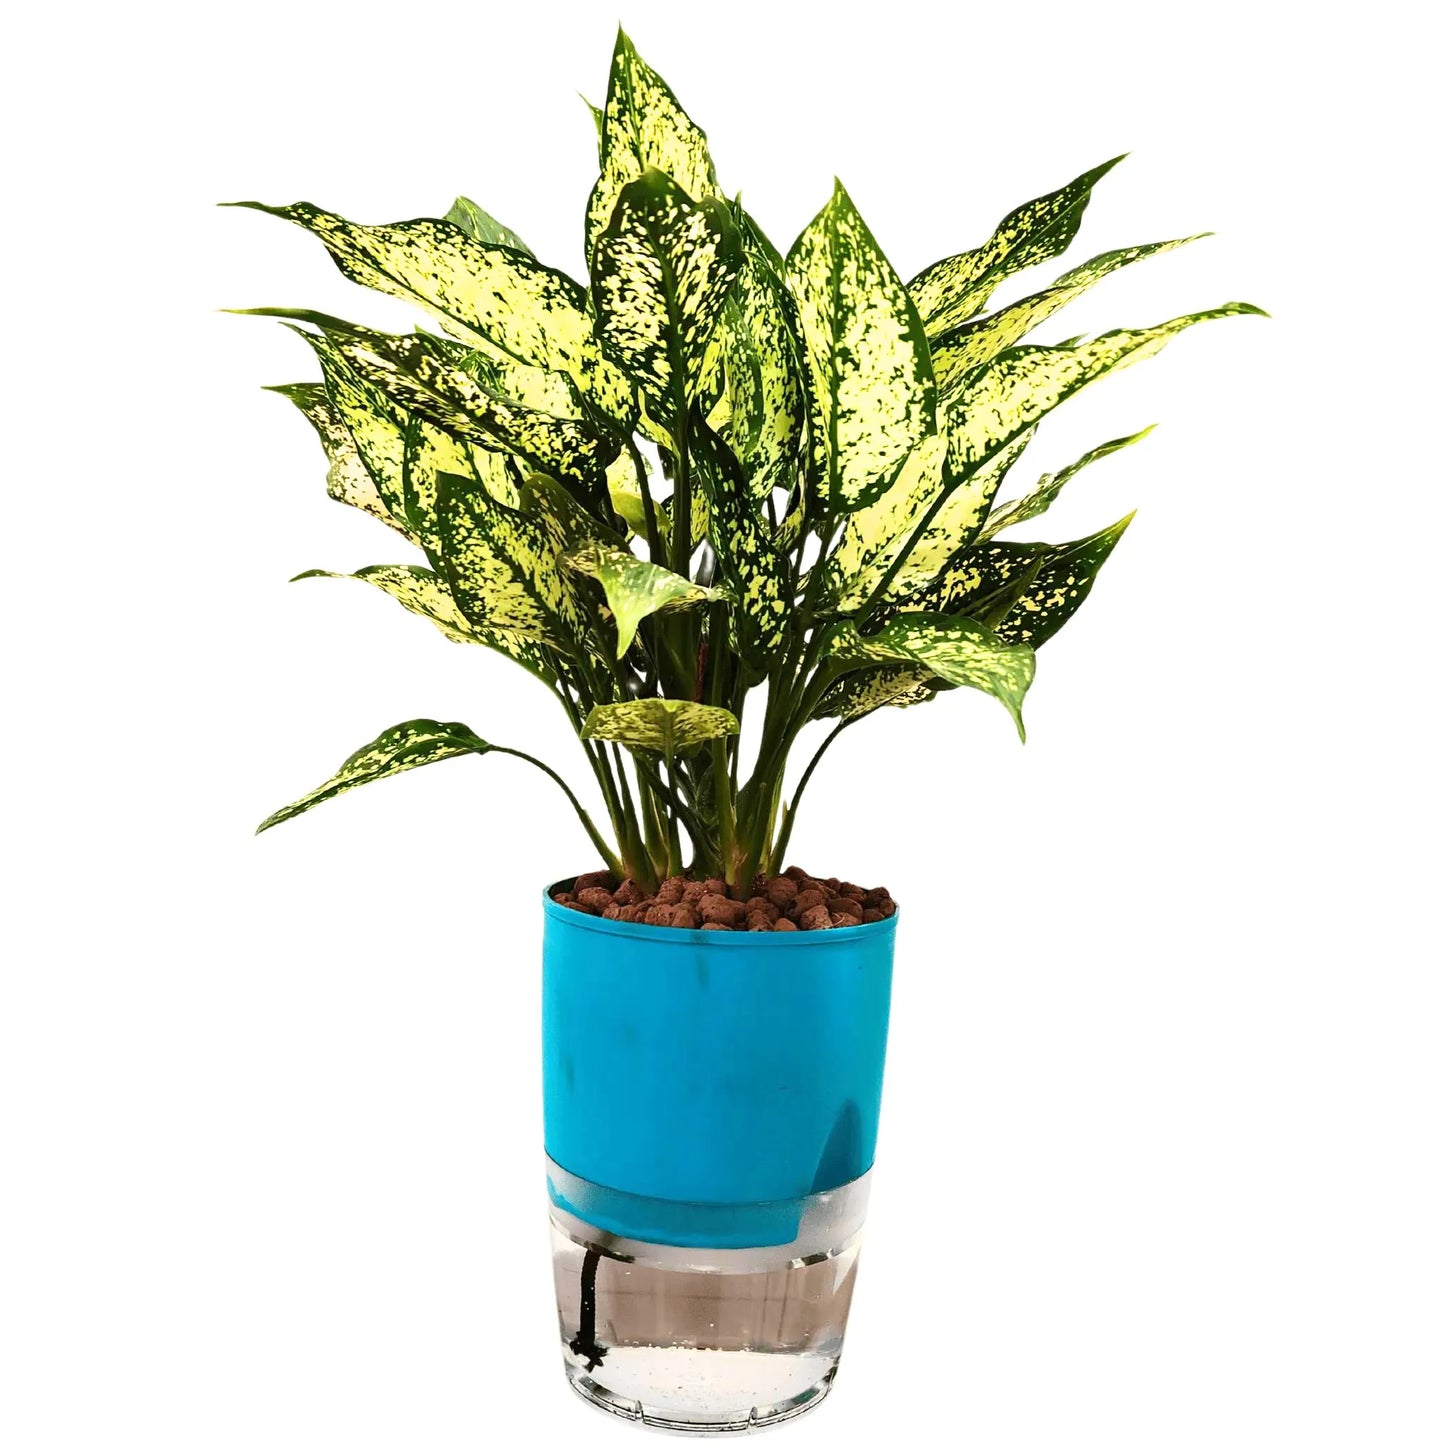 Buy Snow white AGLAONEMA Plant in Self Watering Pot With LECA balls Online at Lalitenterprise